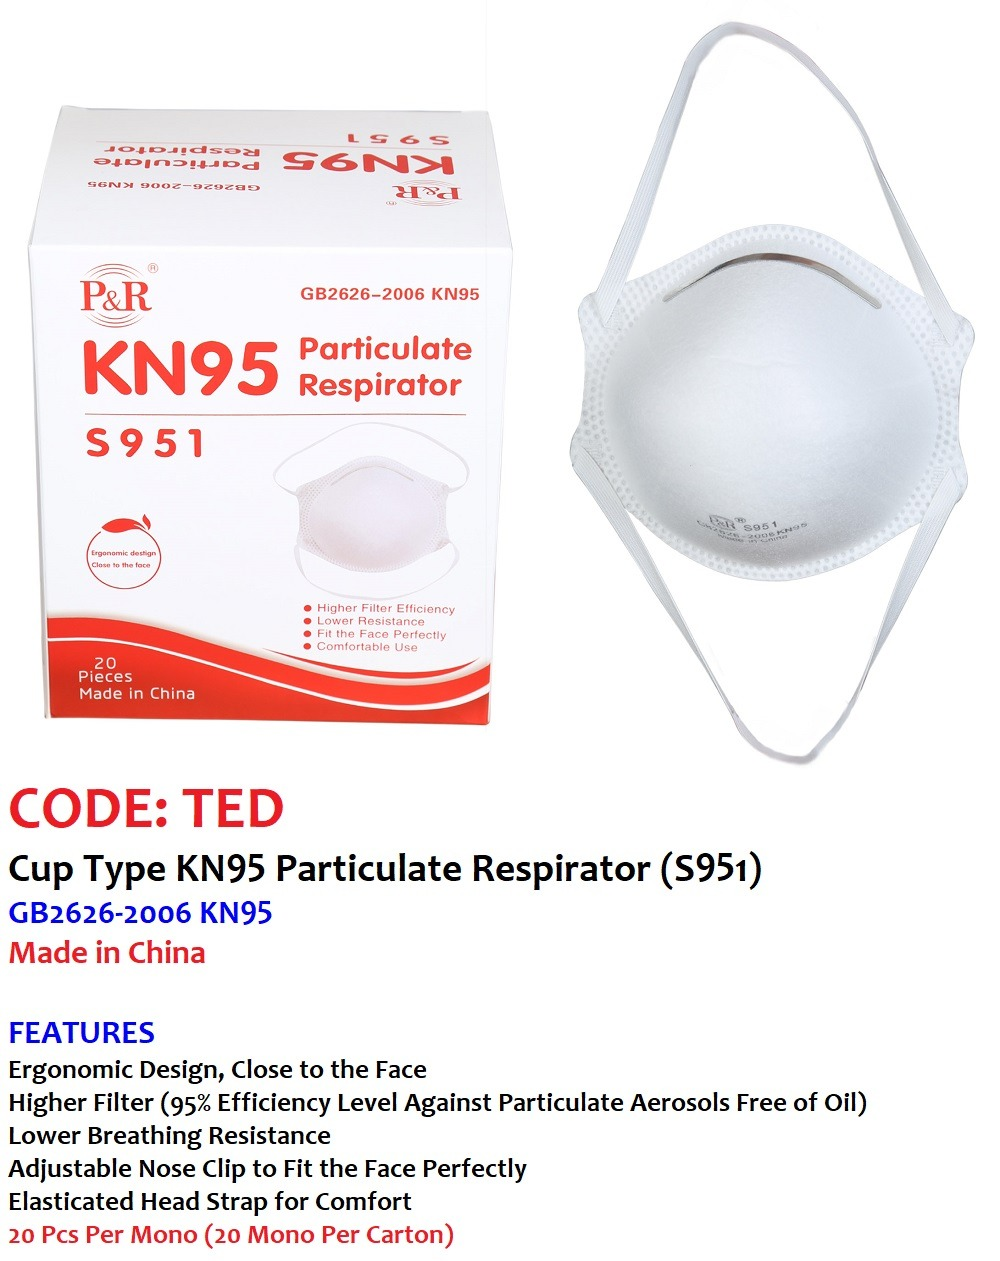 DUST MASK KN95 S951 TED P&R 20 PCS / PKT